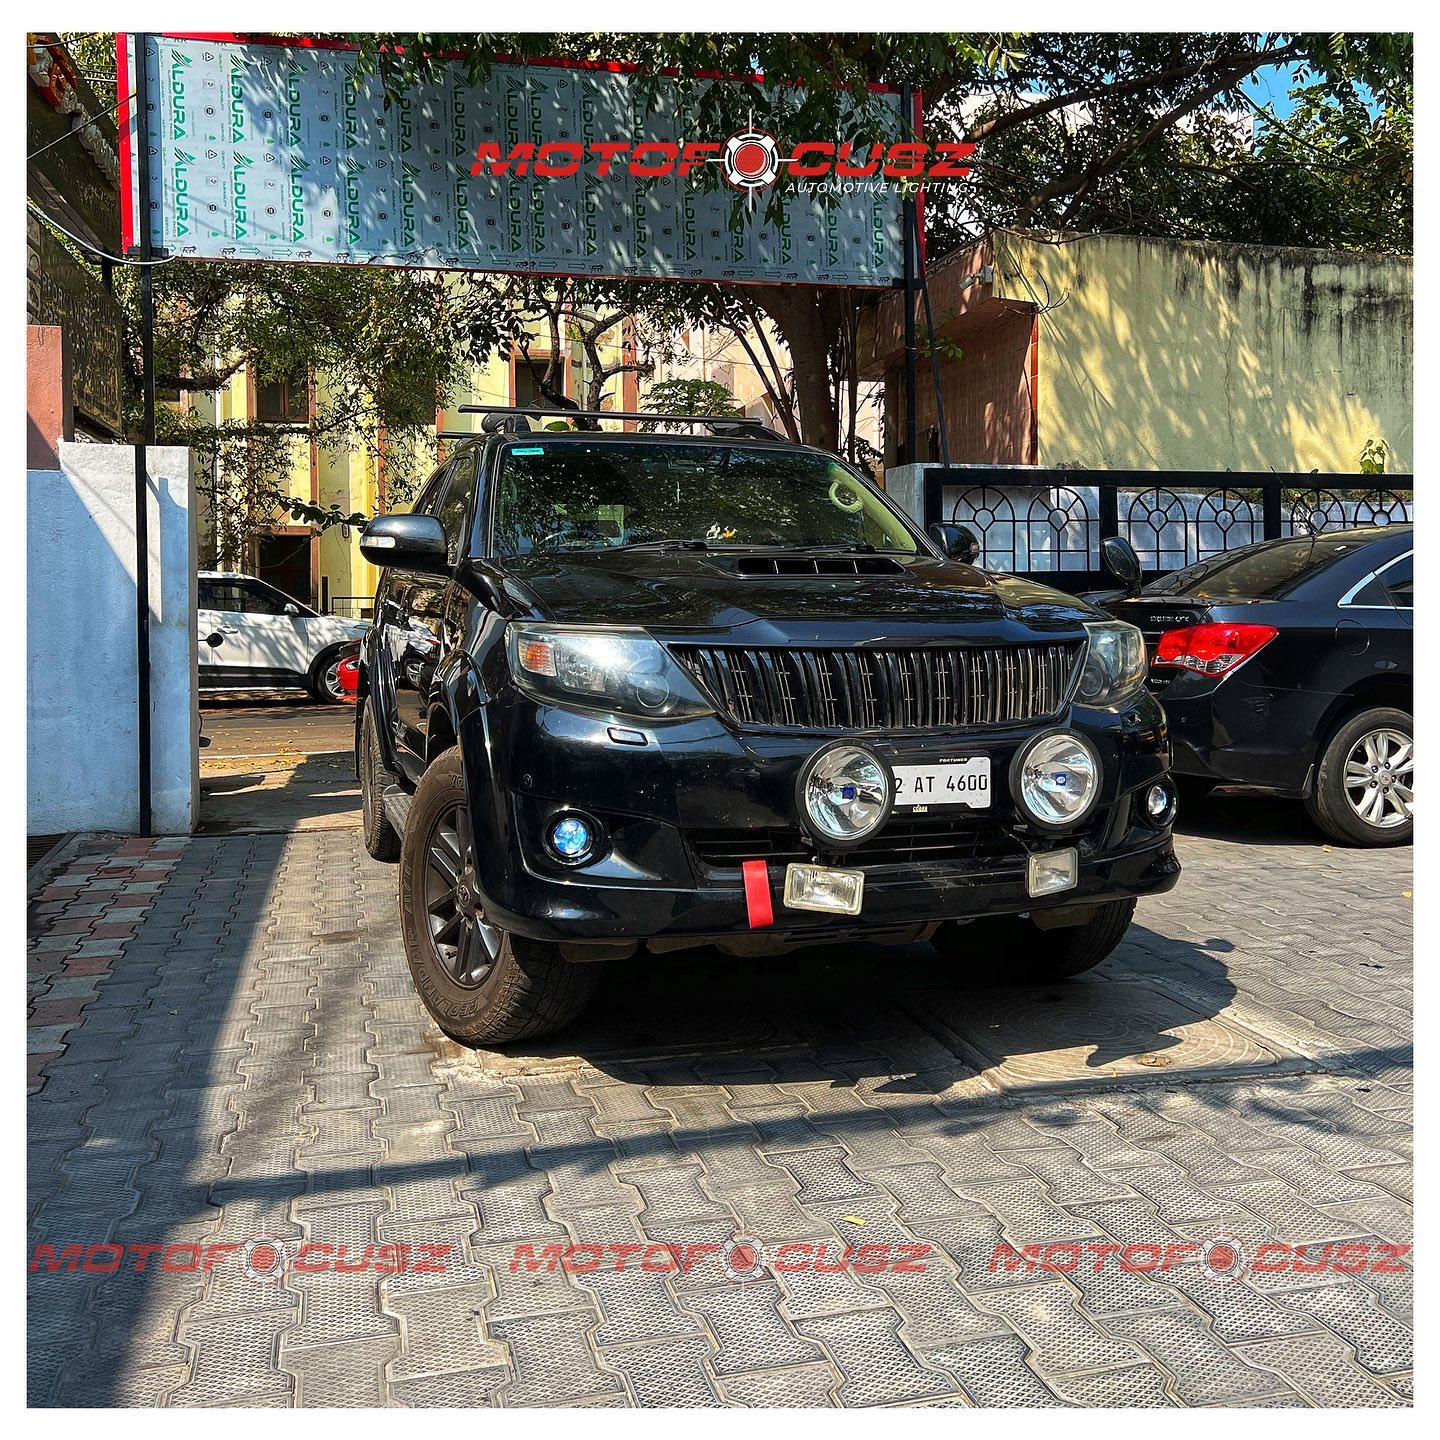 TOYOTA FORTUNER GETS BI-XENON FOG PROJECTORS FOR EXTRA VISIBILITY​ from Motofocusz Best Headlight customisation in Chennai